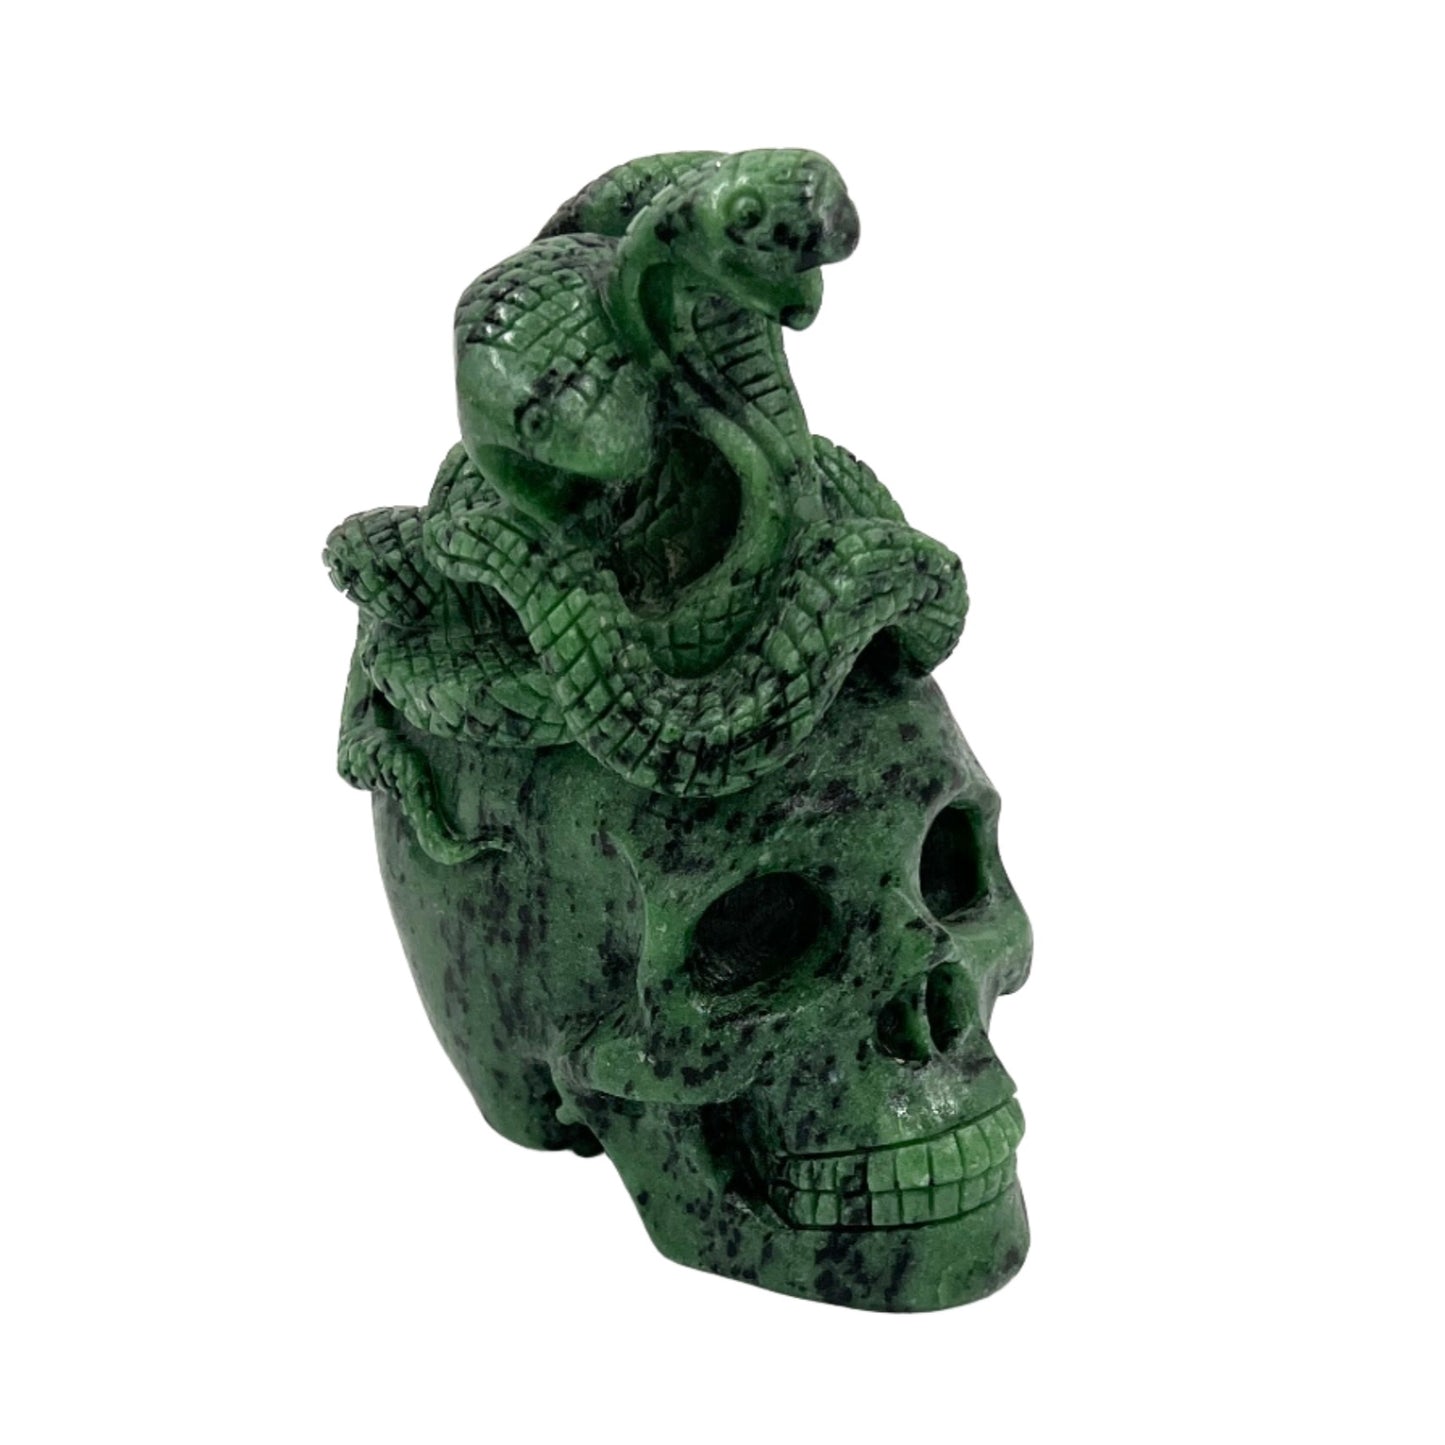 Zoisite Skull with Snakes